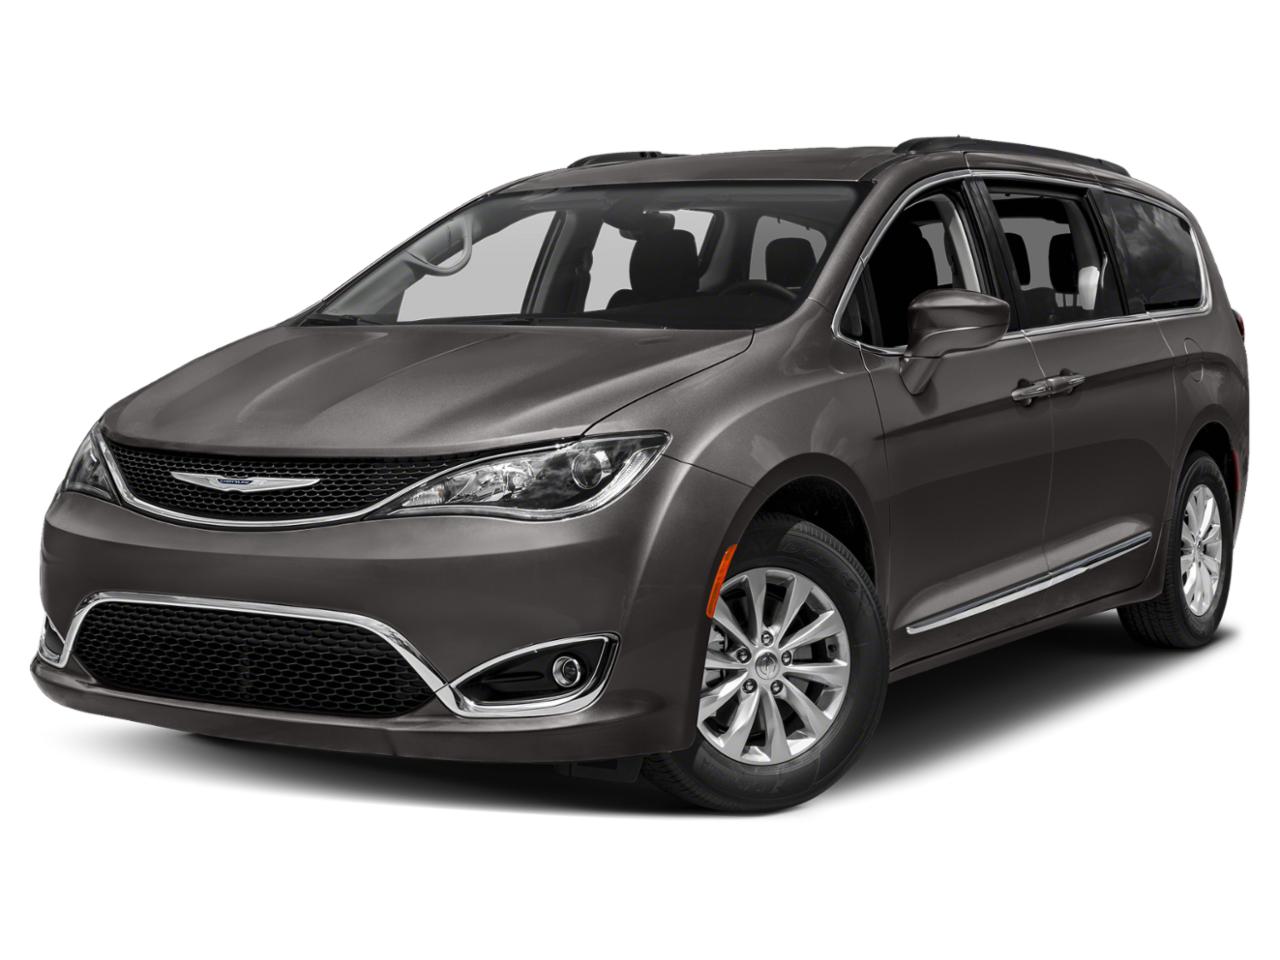 2018 Chrysler Pacifica Vehicle Photo in Plainfield, IL 60586